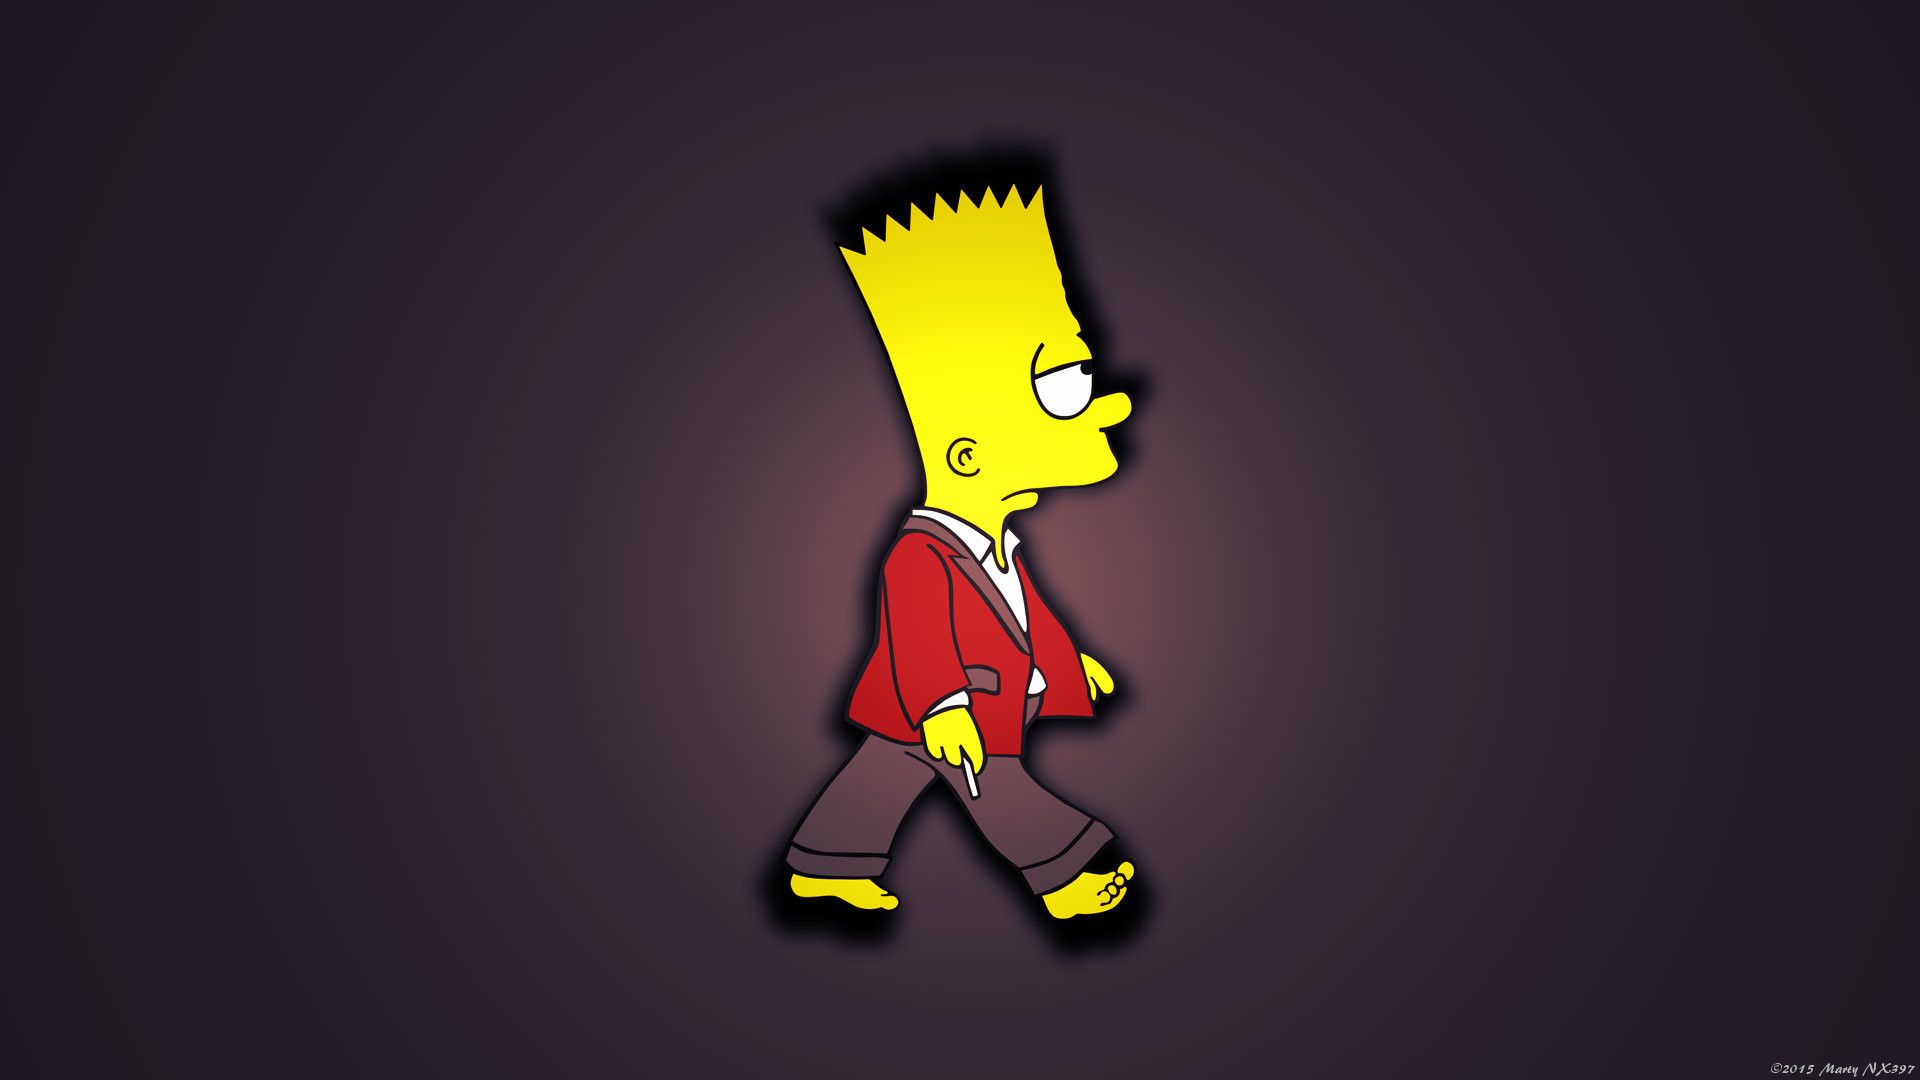 The simpsons character walking down a dark street - Bart Simpson